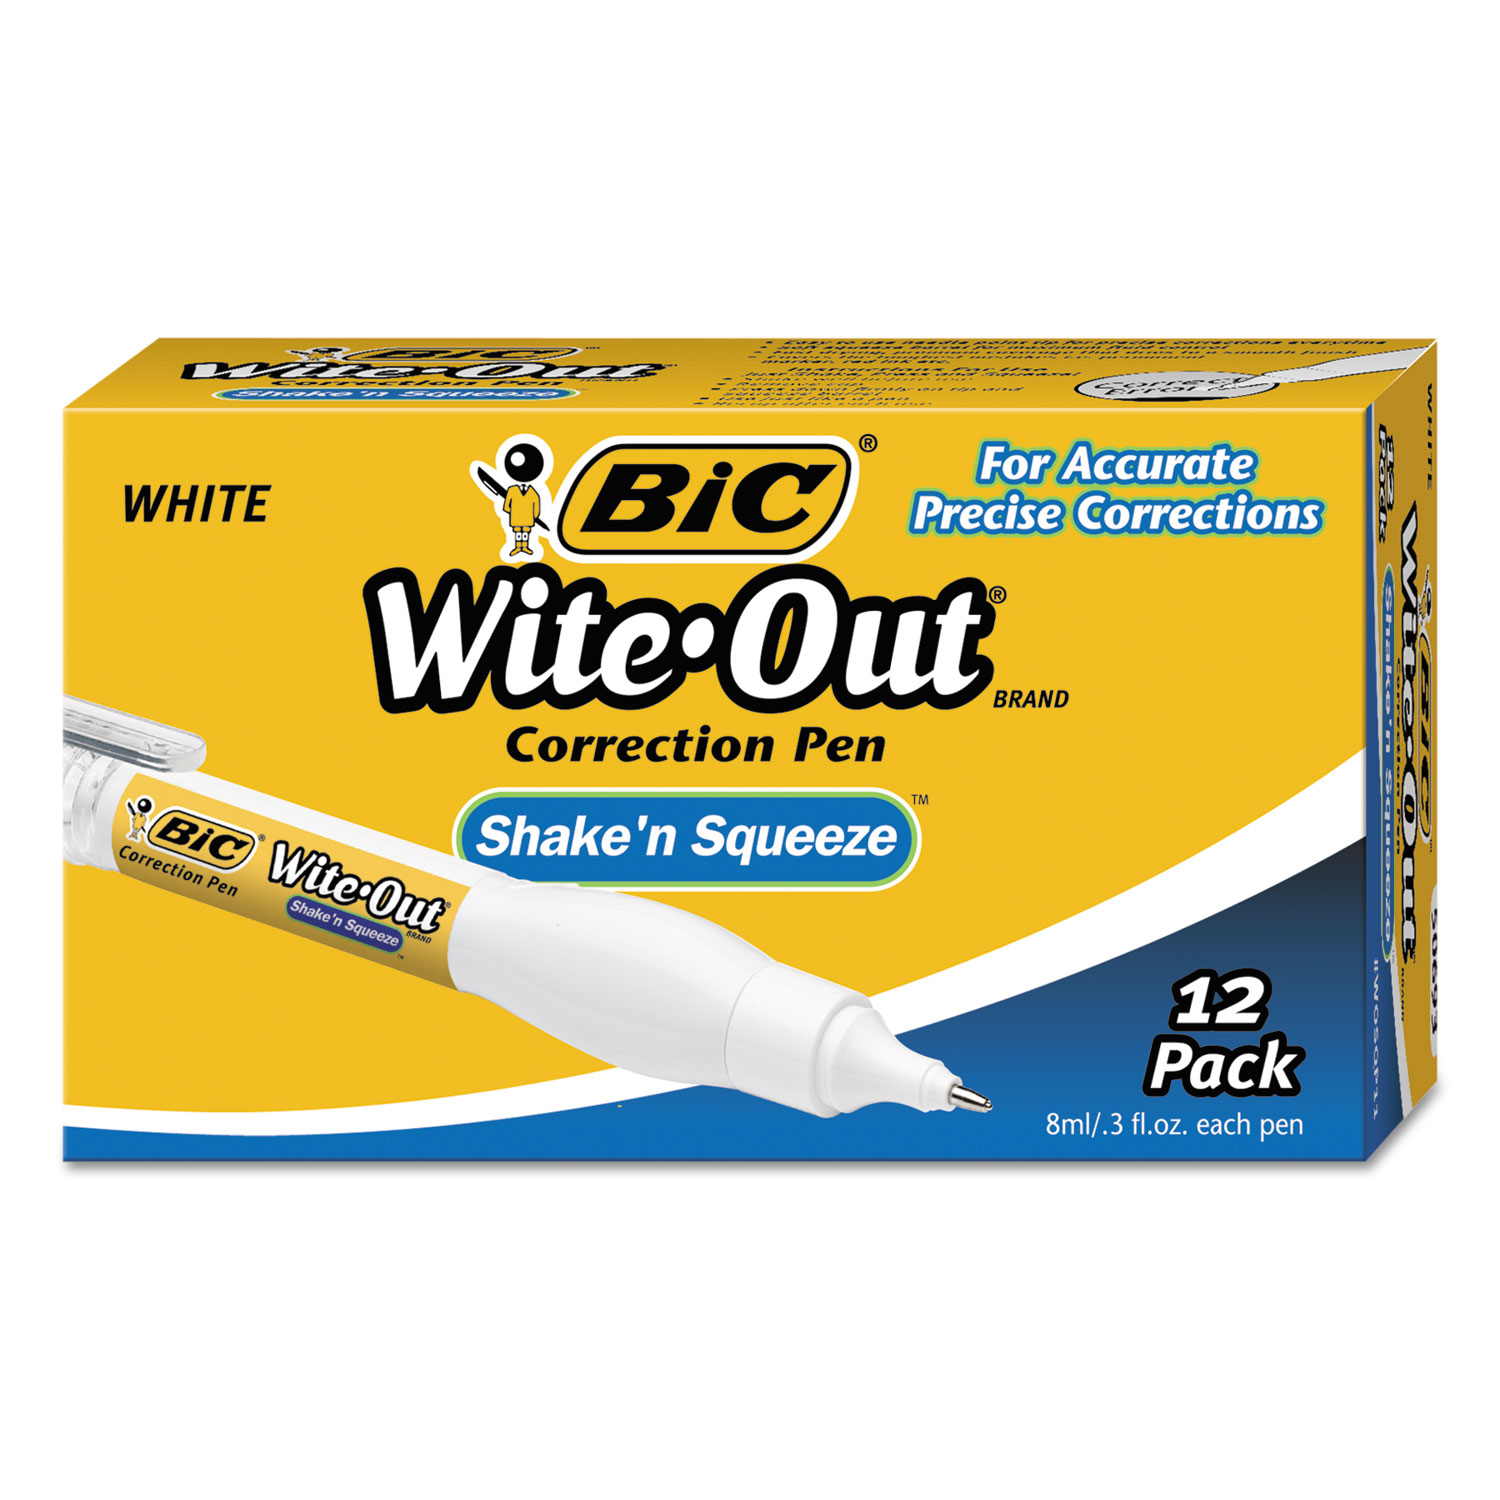 Wite-Out Shake n Squeeze Correction Pen, 8 ml, White